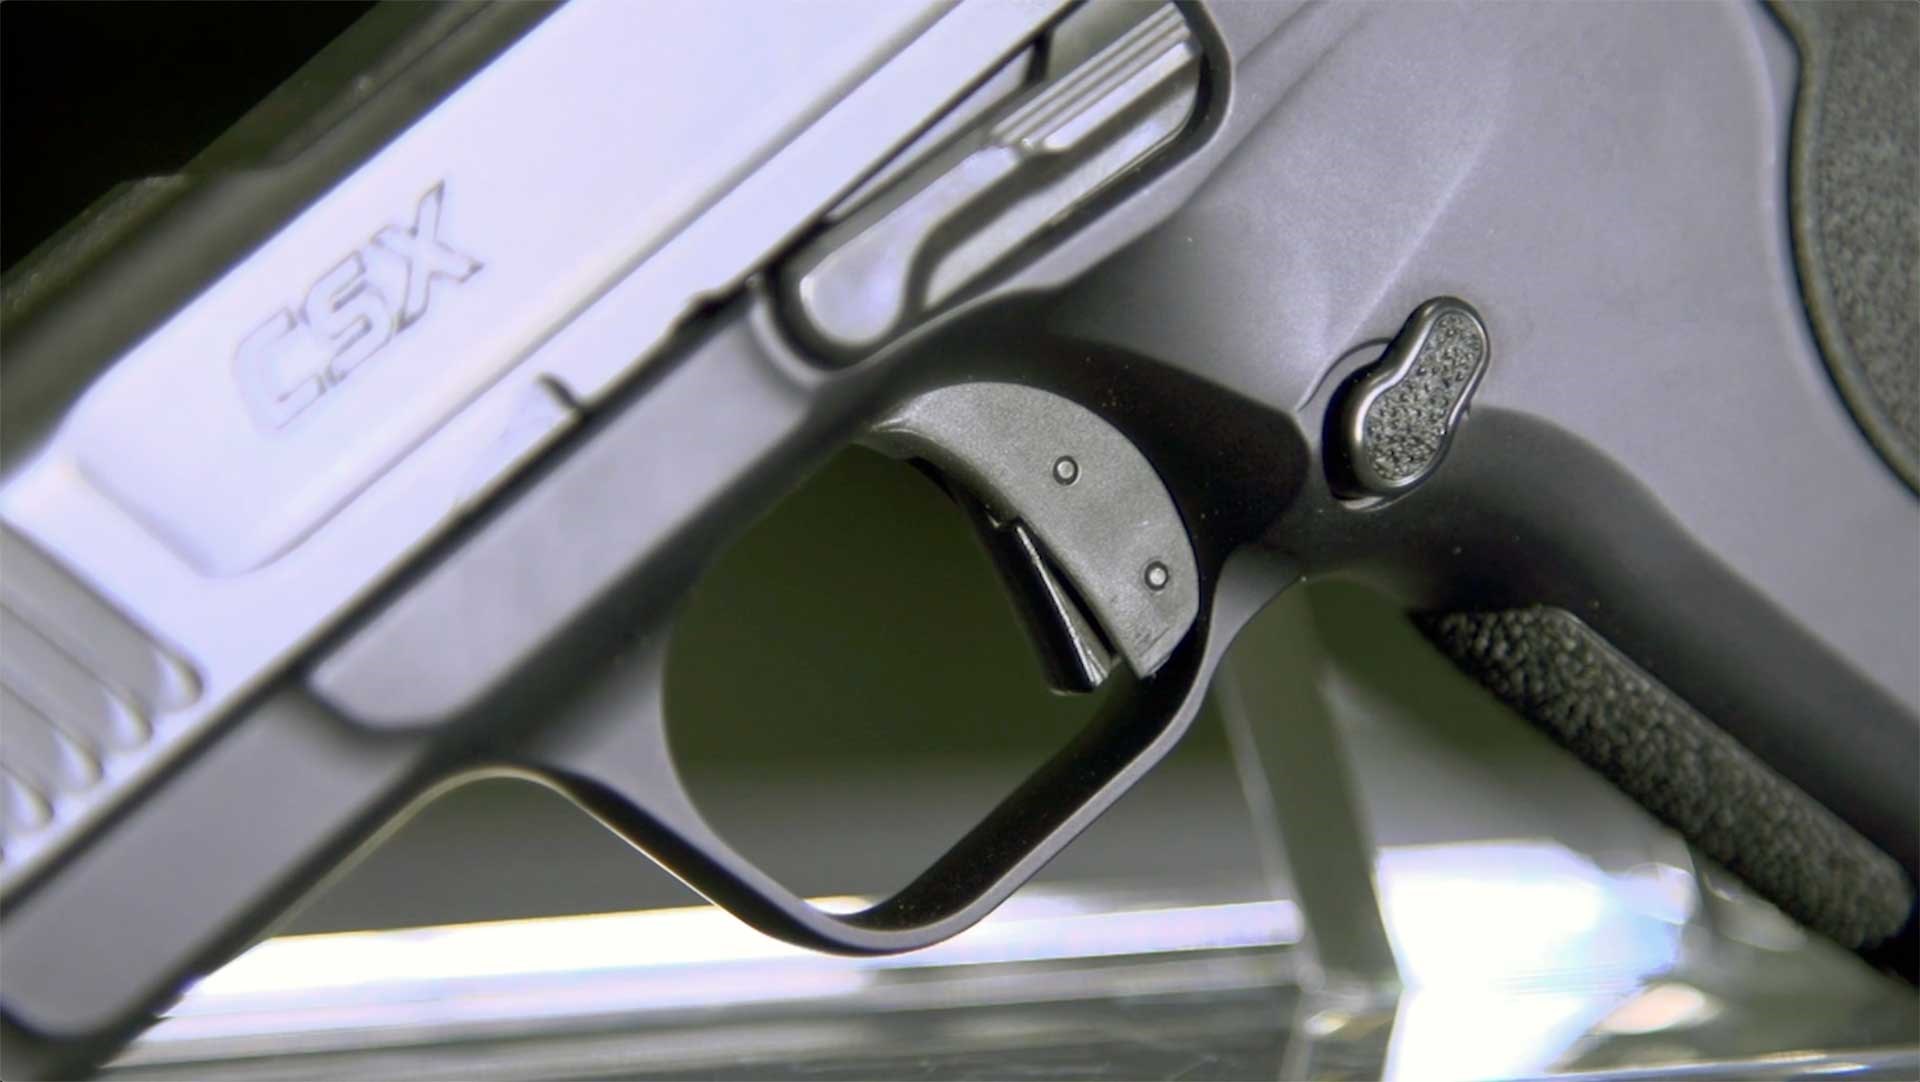 A close-up shot of the integrated blade safety on the trigger of the Smith & Wesson CSX.